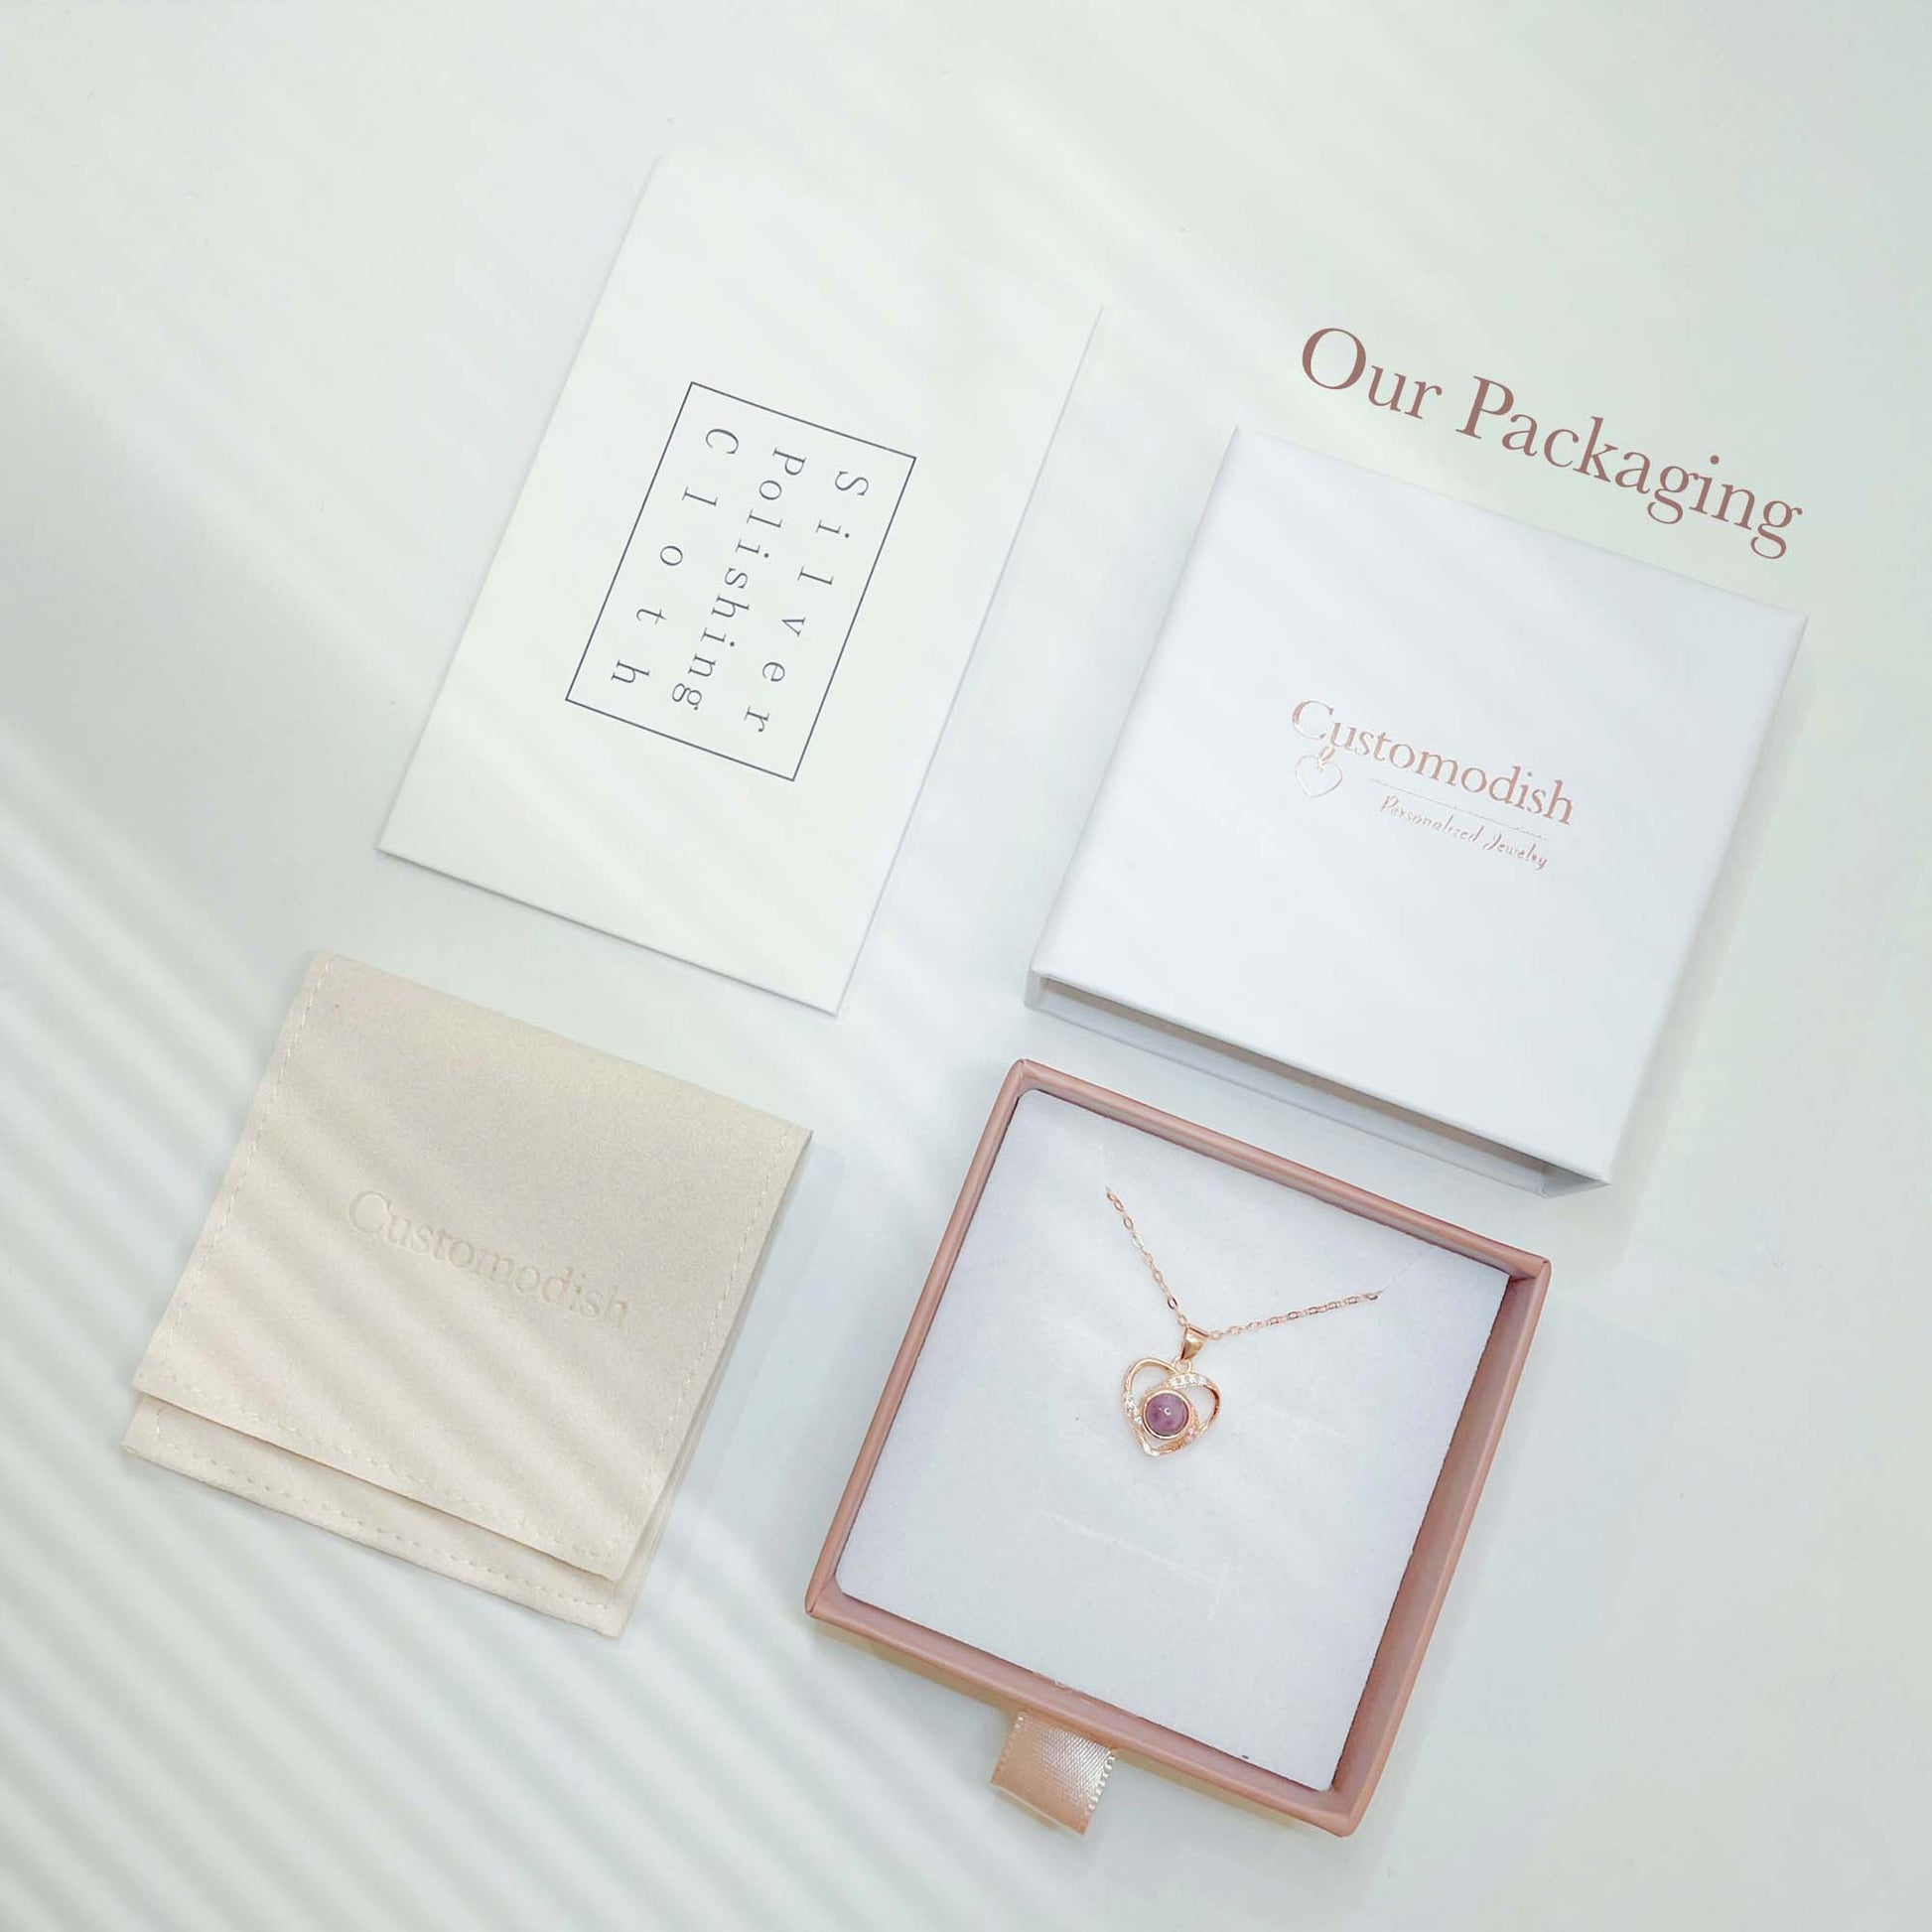 Our projection necklace comes in a fashionable jewelry box.